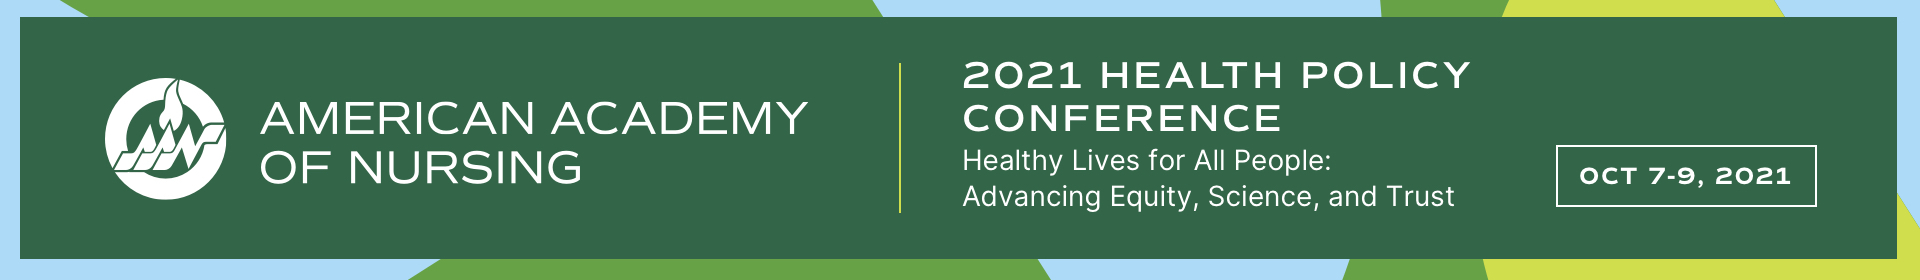 2021 Health Policy Conference Event Banner